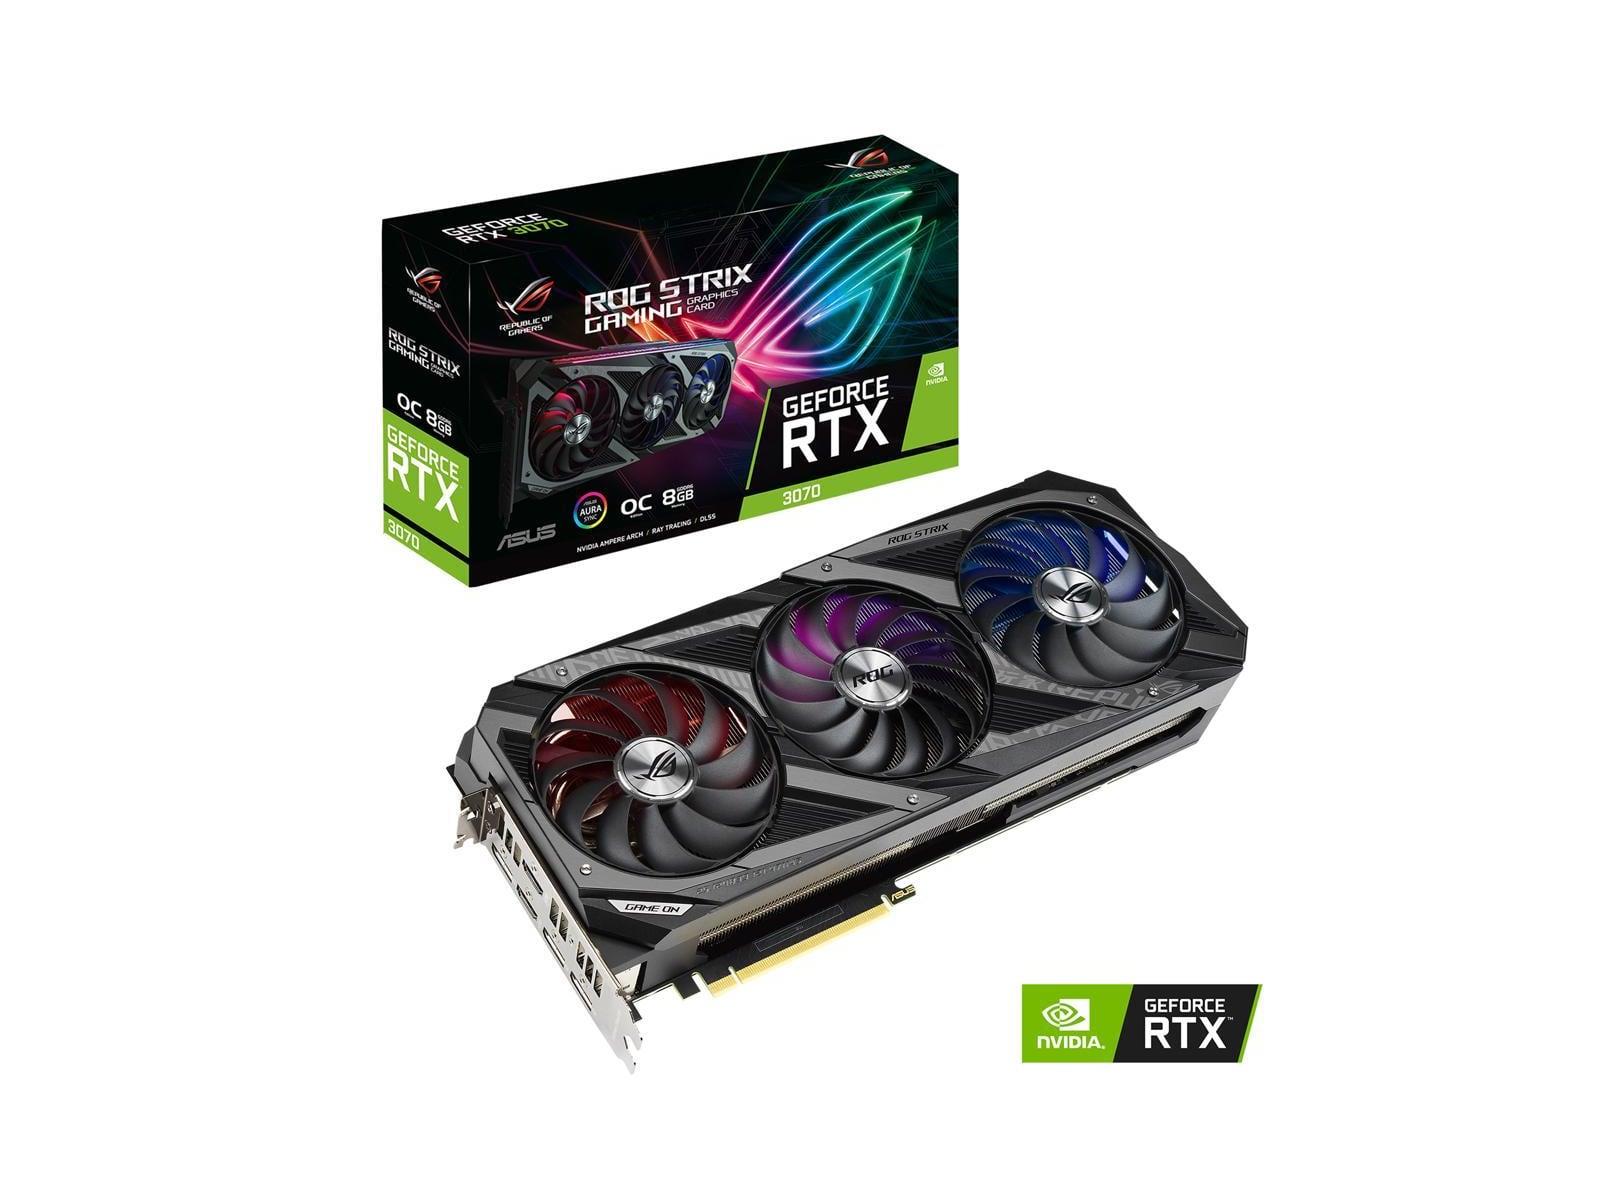 GeForce RTX 3070 Online Ordering Was Just As Miserable As NVIDIA's 